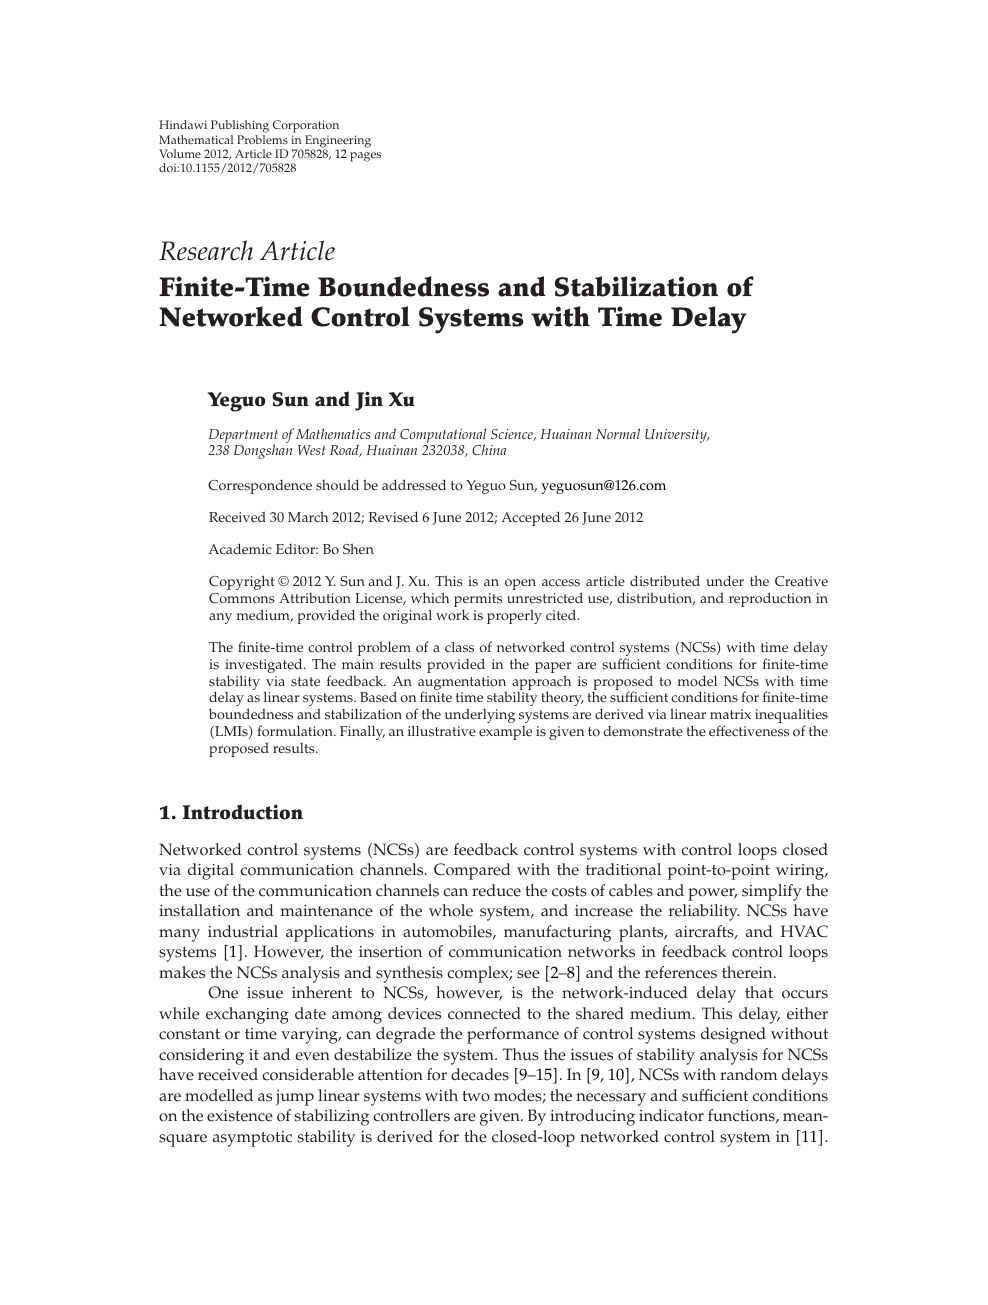 Finite Time Boundedness And Stabilization Of Networked Control Systems With Time Delay Topic Of Research Paper In Mathematics Download Scholarly Article Pdf And Read For Free On Cyberleninka Open Science Hub